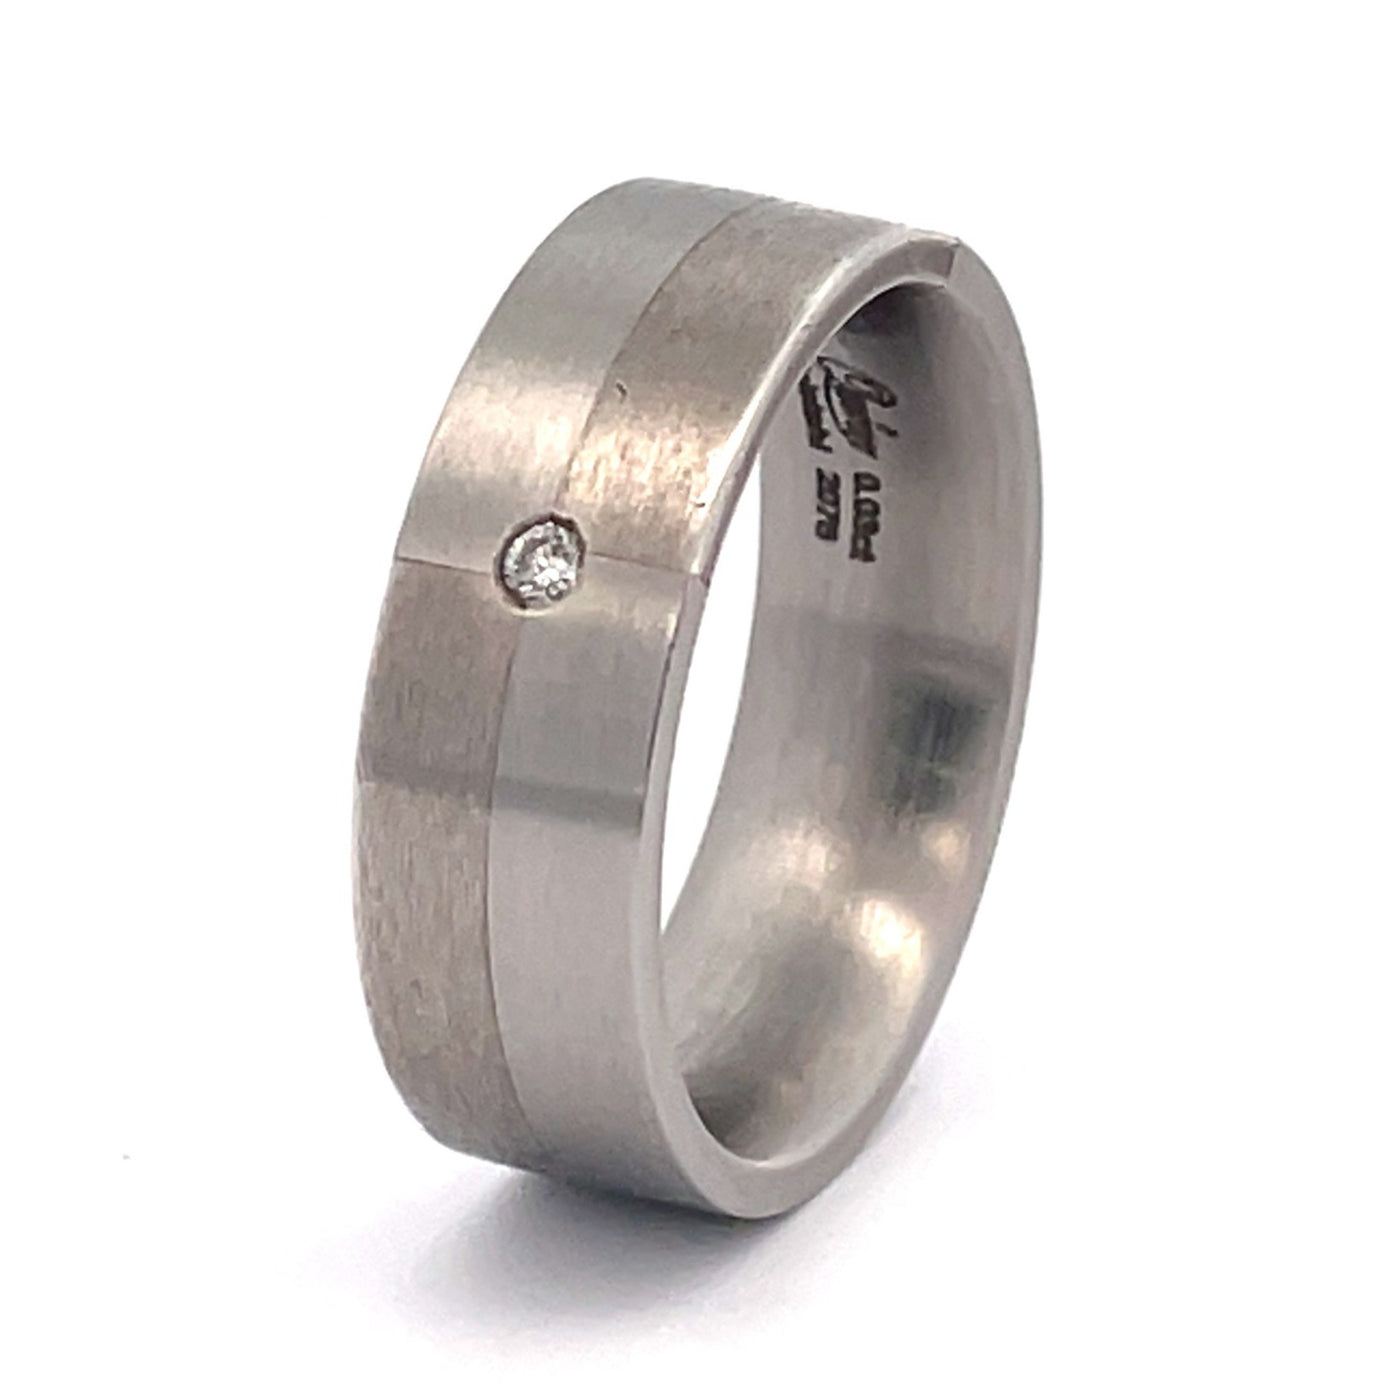 7mm Stainless Steel & Silver Diamond Ring - Size R 1/2